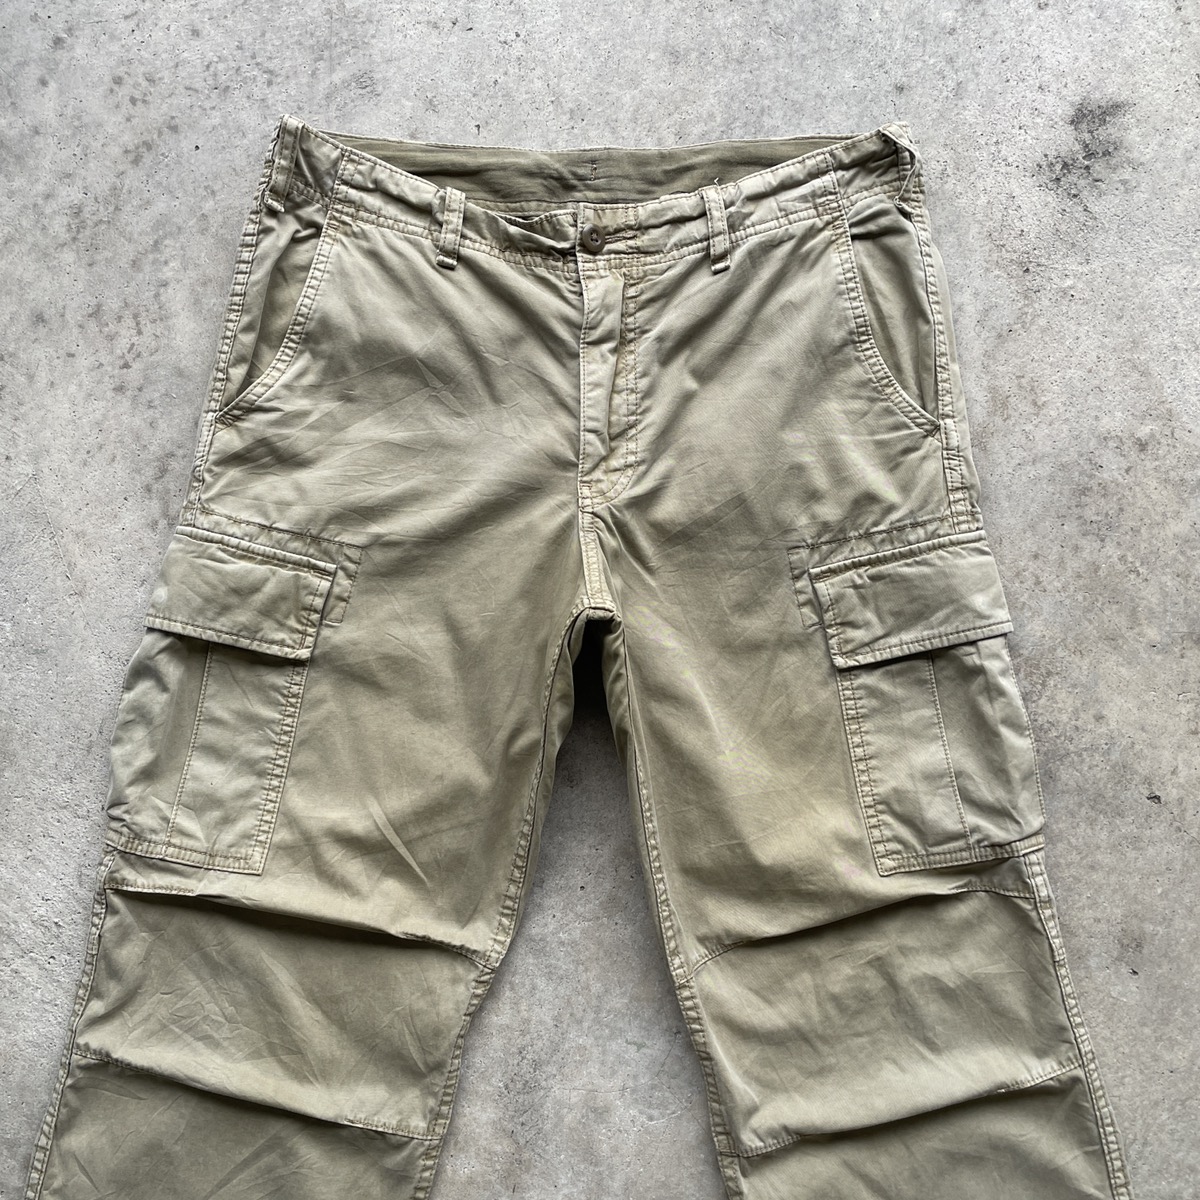 Vintage - Japanese Brand Faded Multipocket Tactical Cargo Pants W33x28 - 3